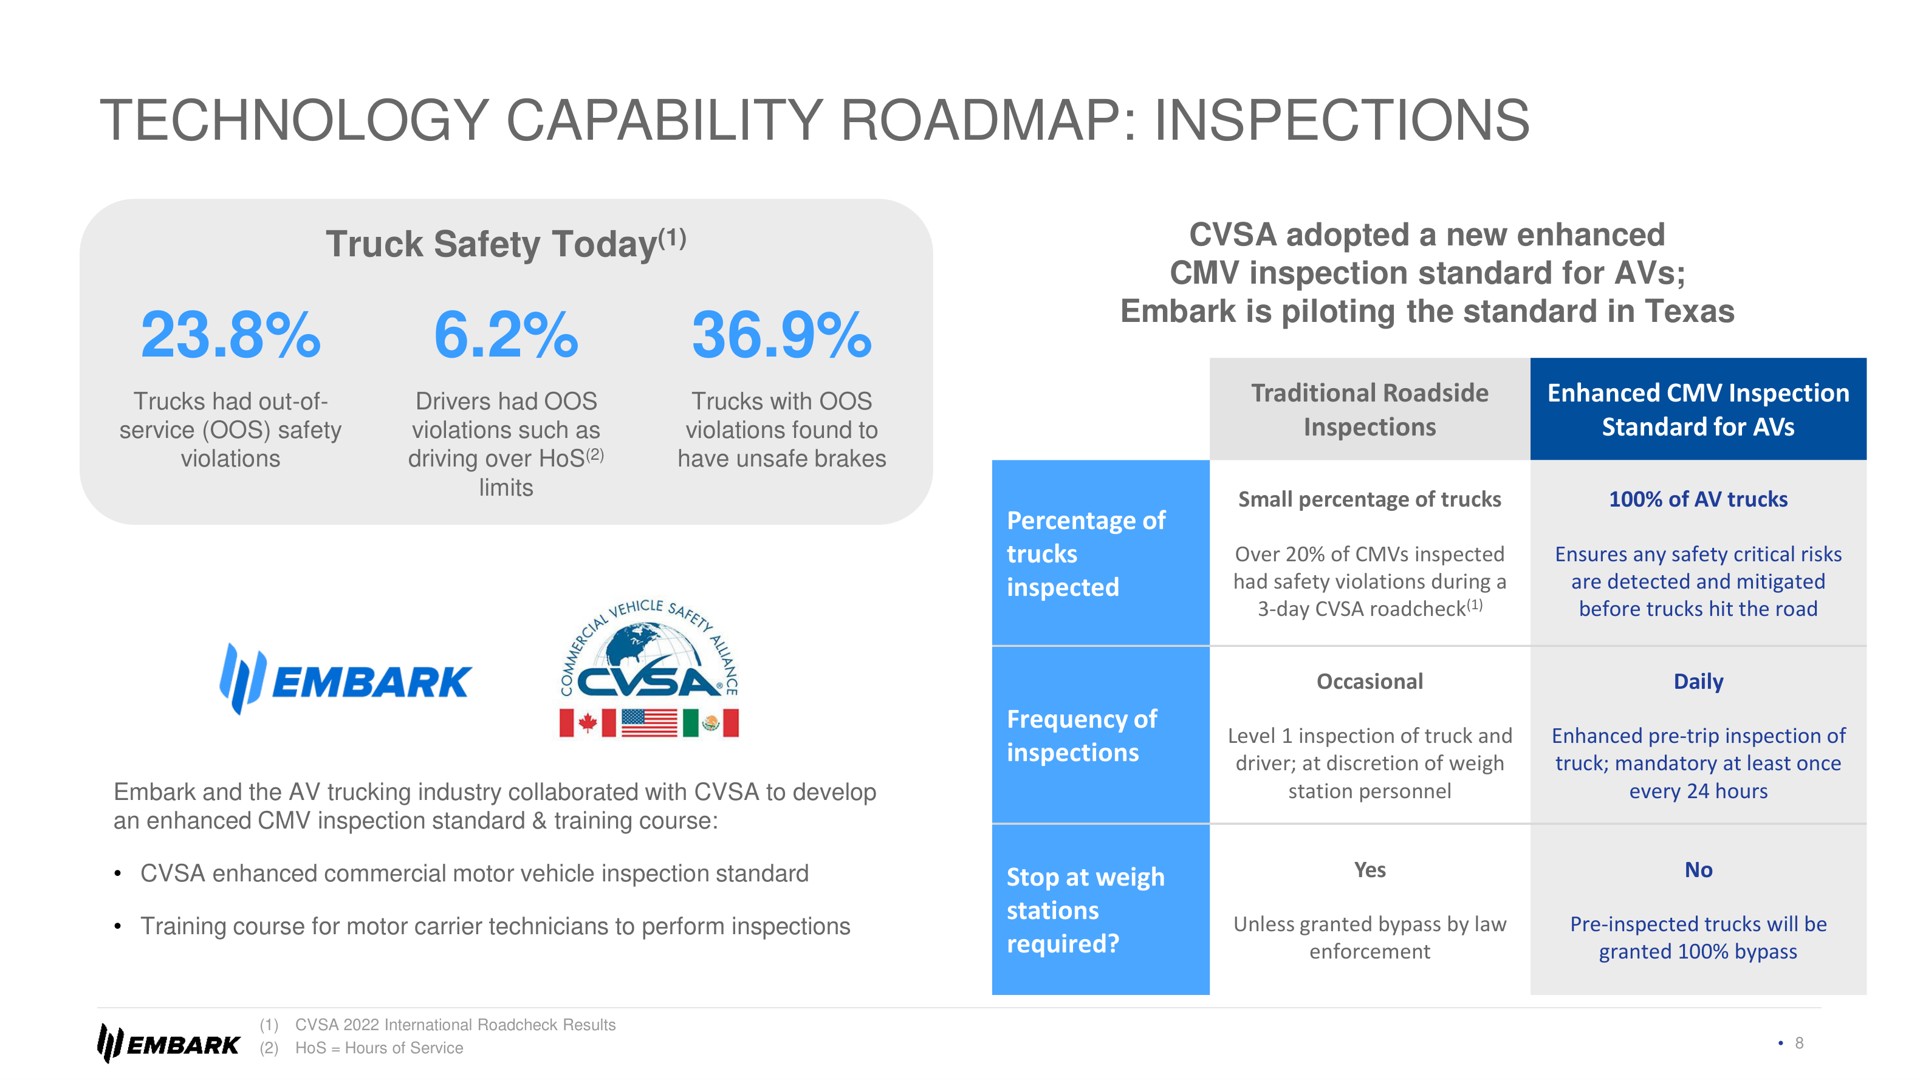 technology capability inspections i embark occasional daily | Embark